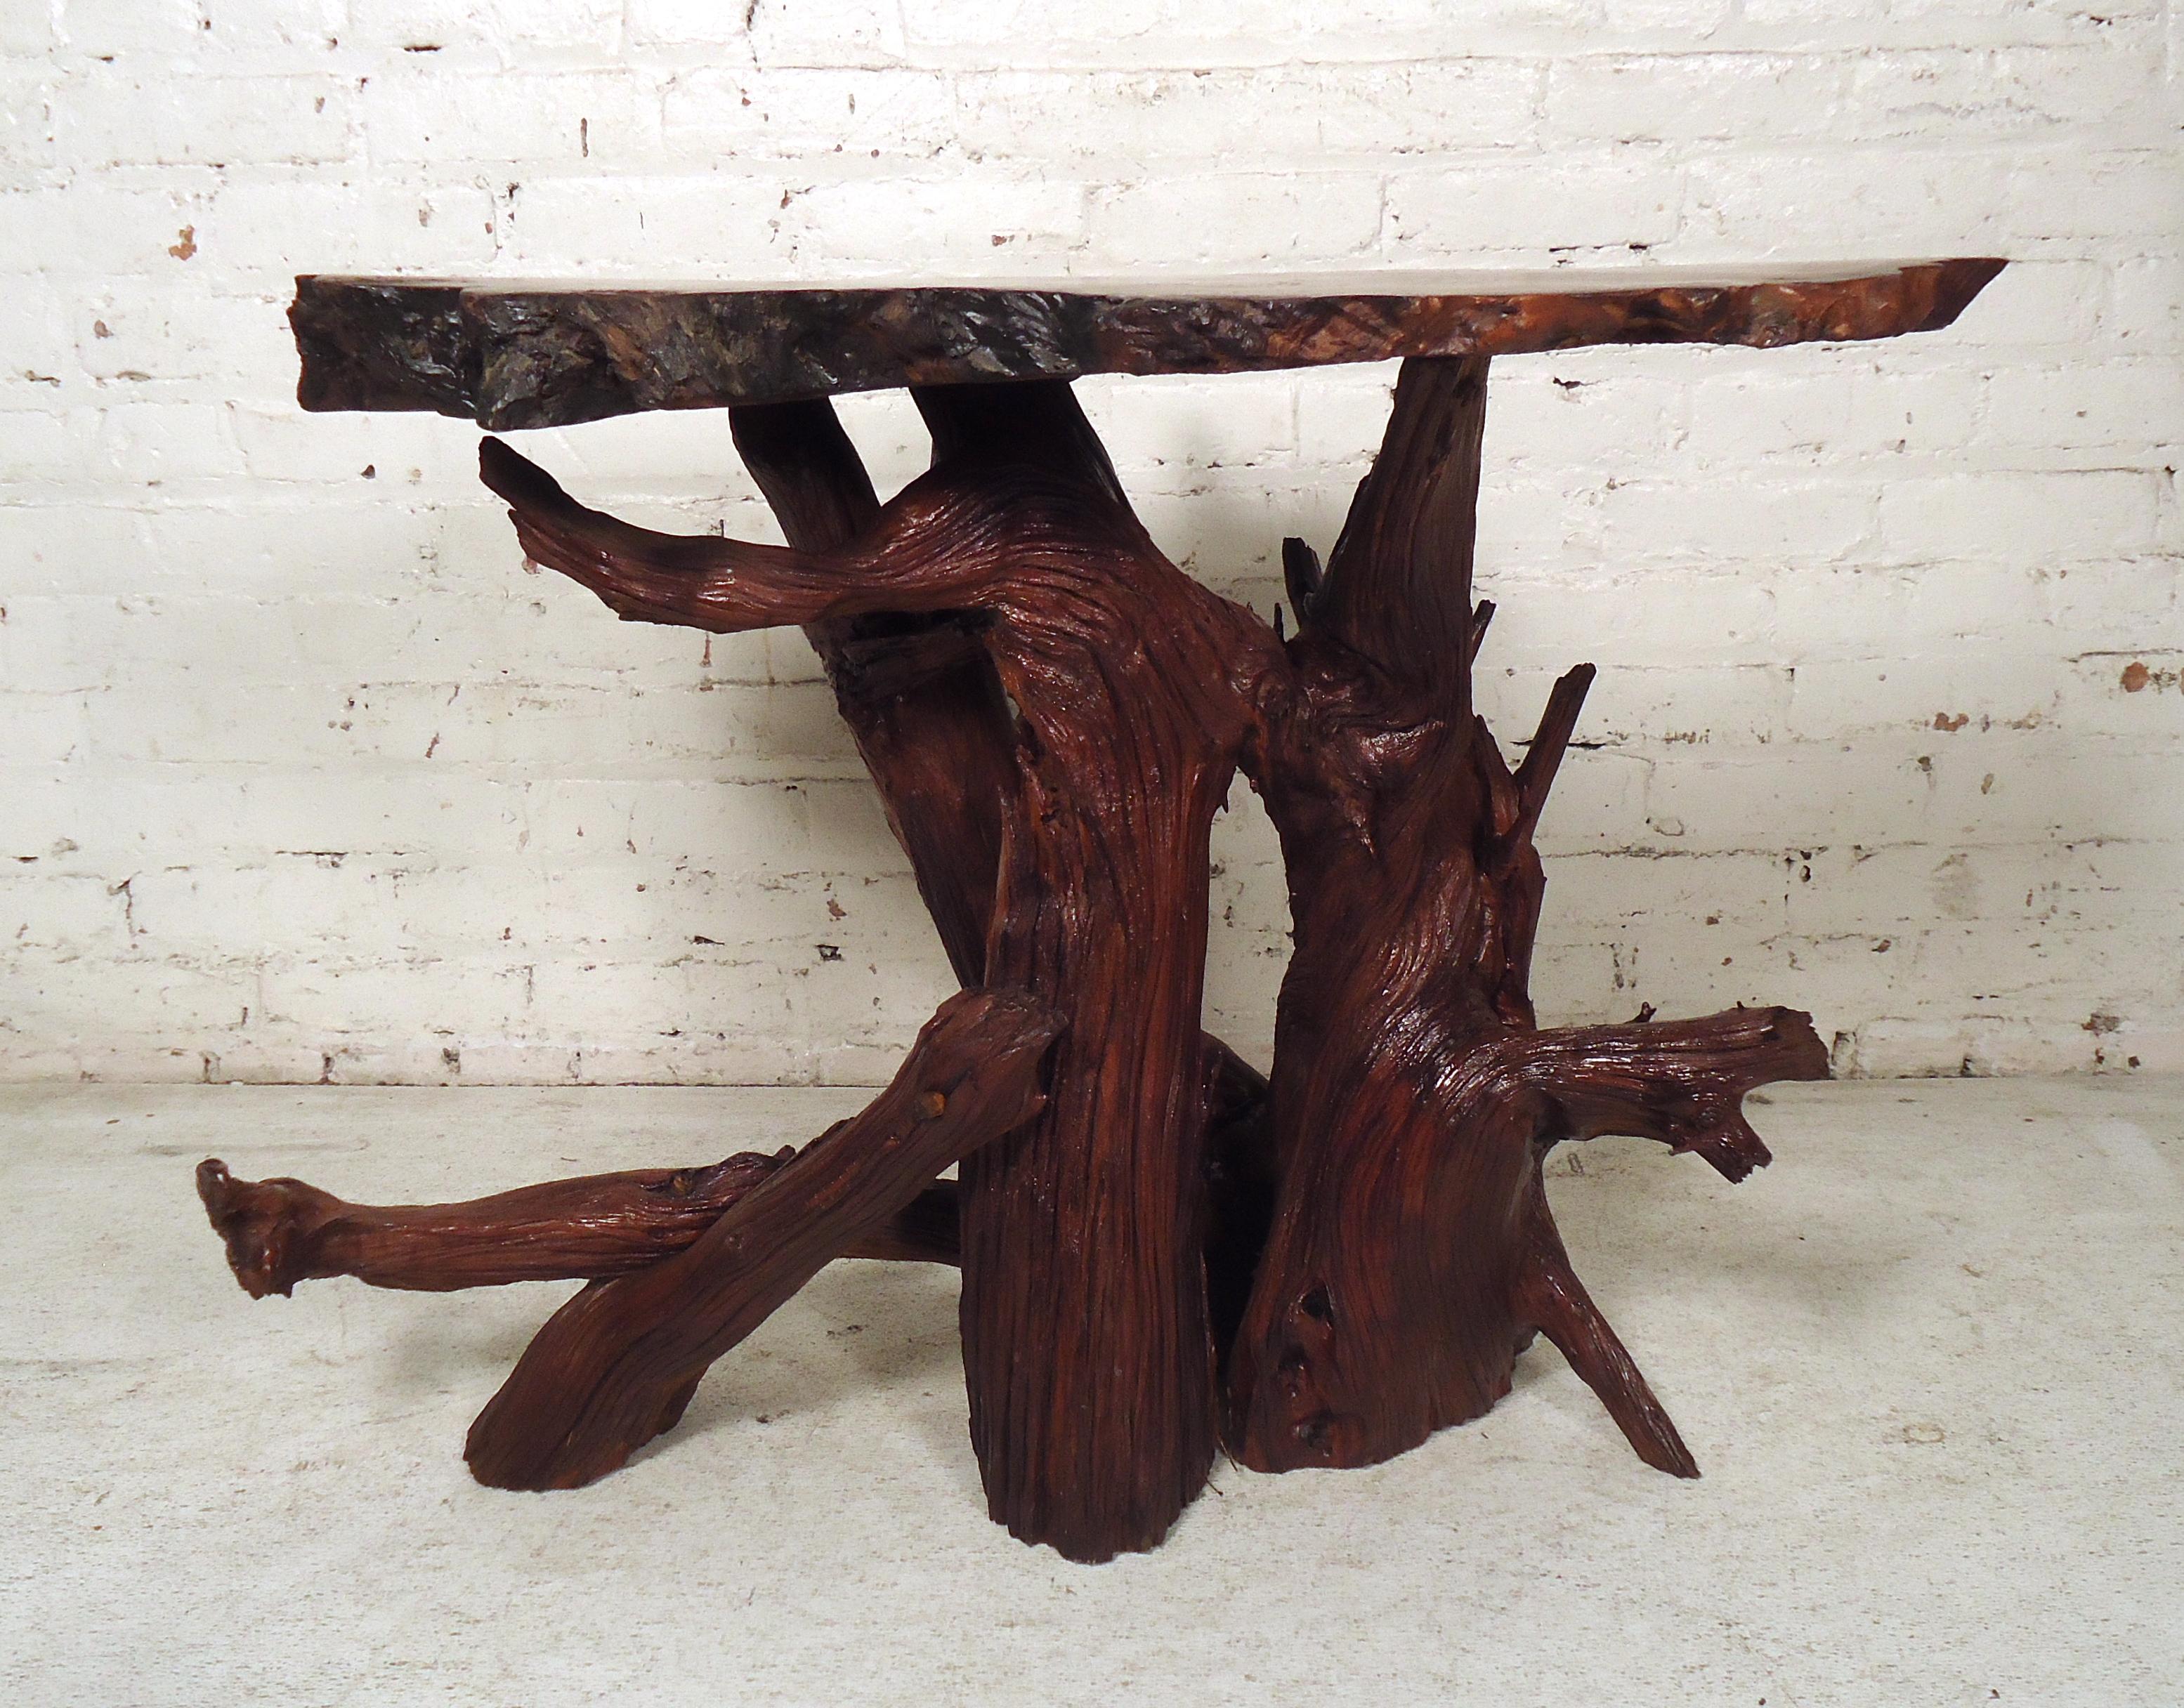 This gorgeous vintage modern coffee table features natural hardwood construction with a unique tree slab top. The vintage rustic appeal is sure to make an impression in any modern interior. Please confirm item location (NY or NJ).